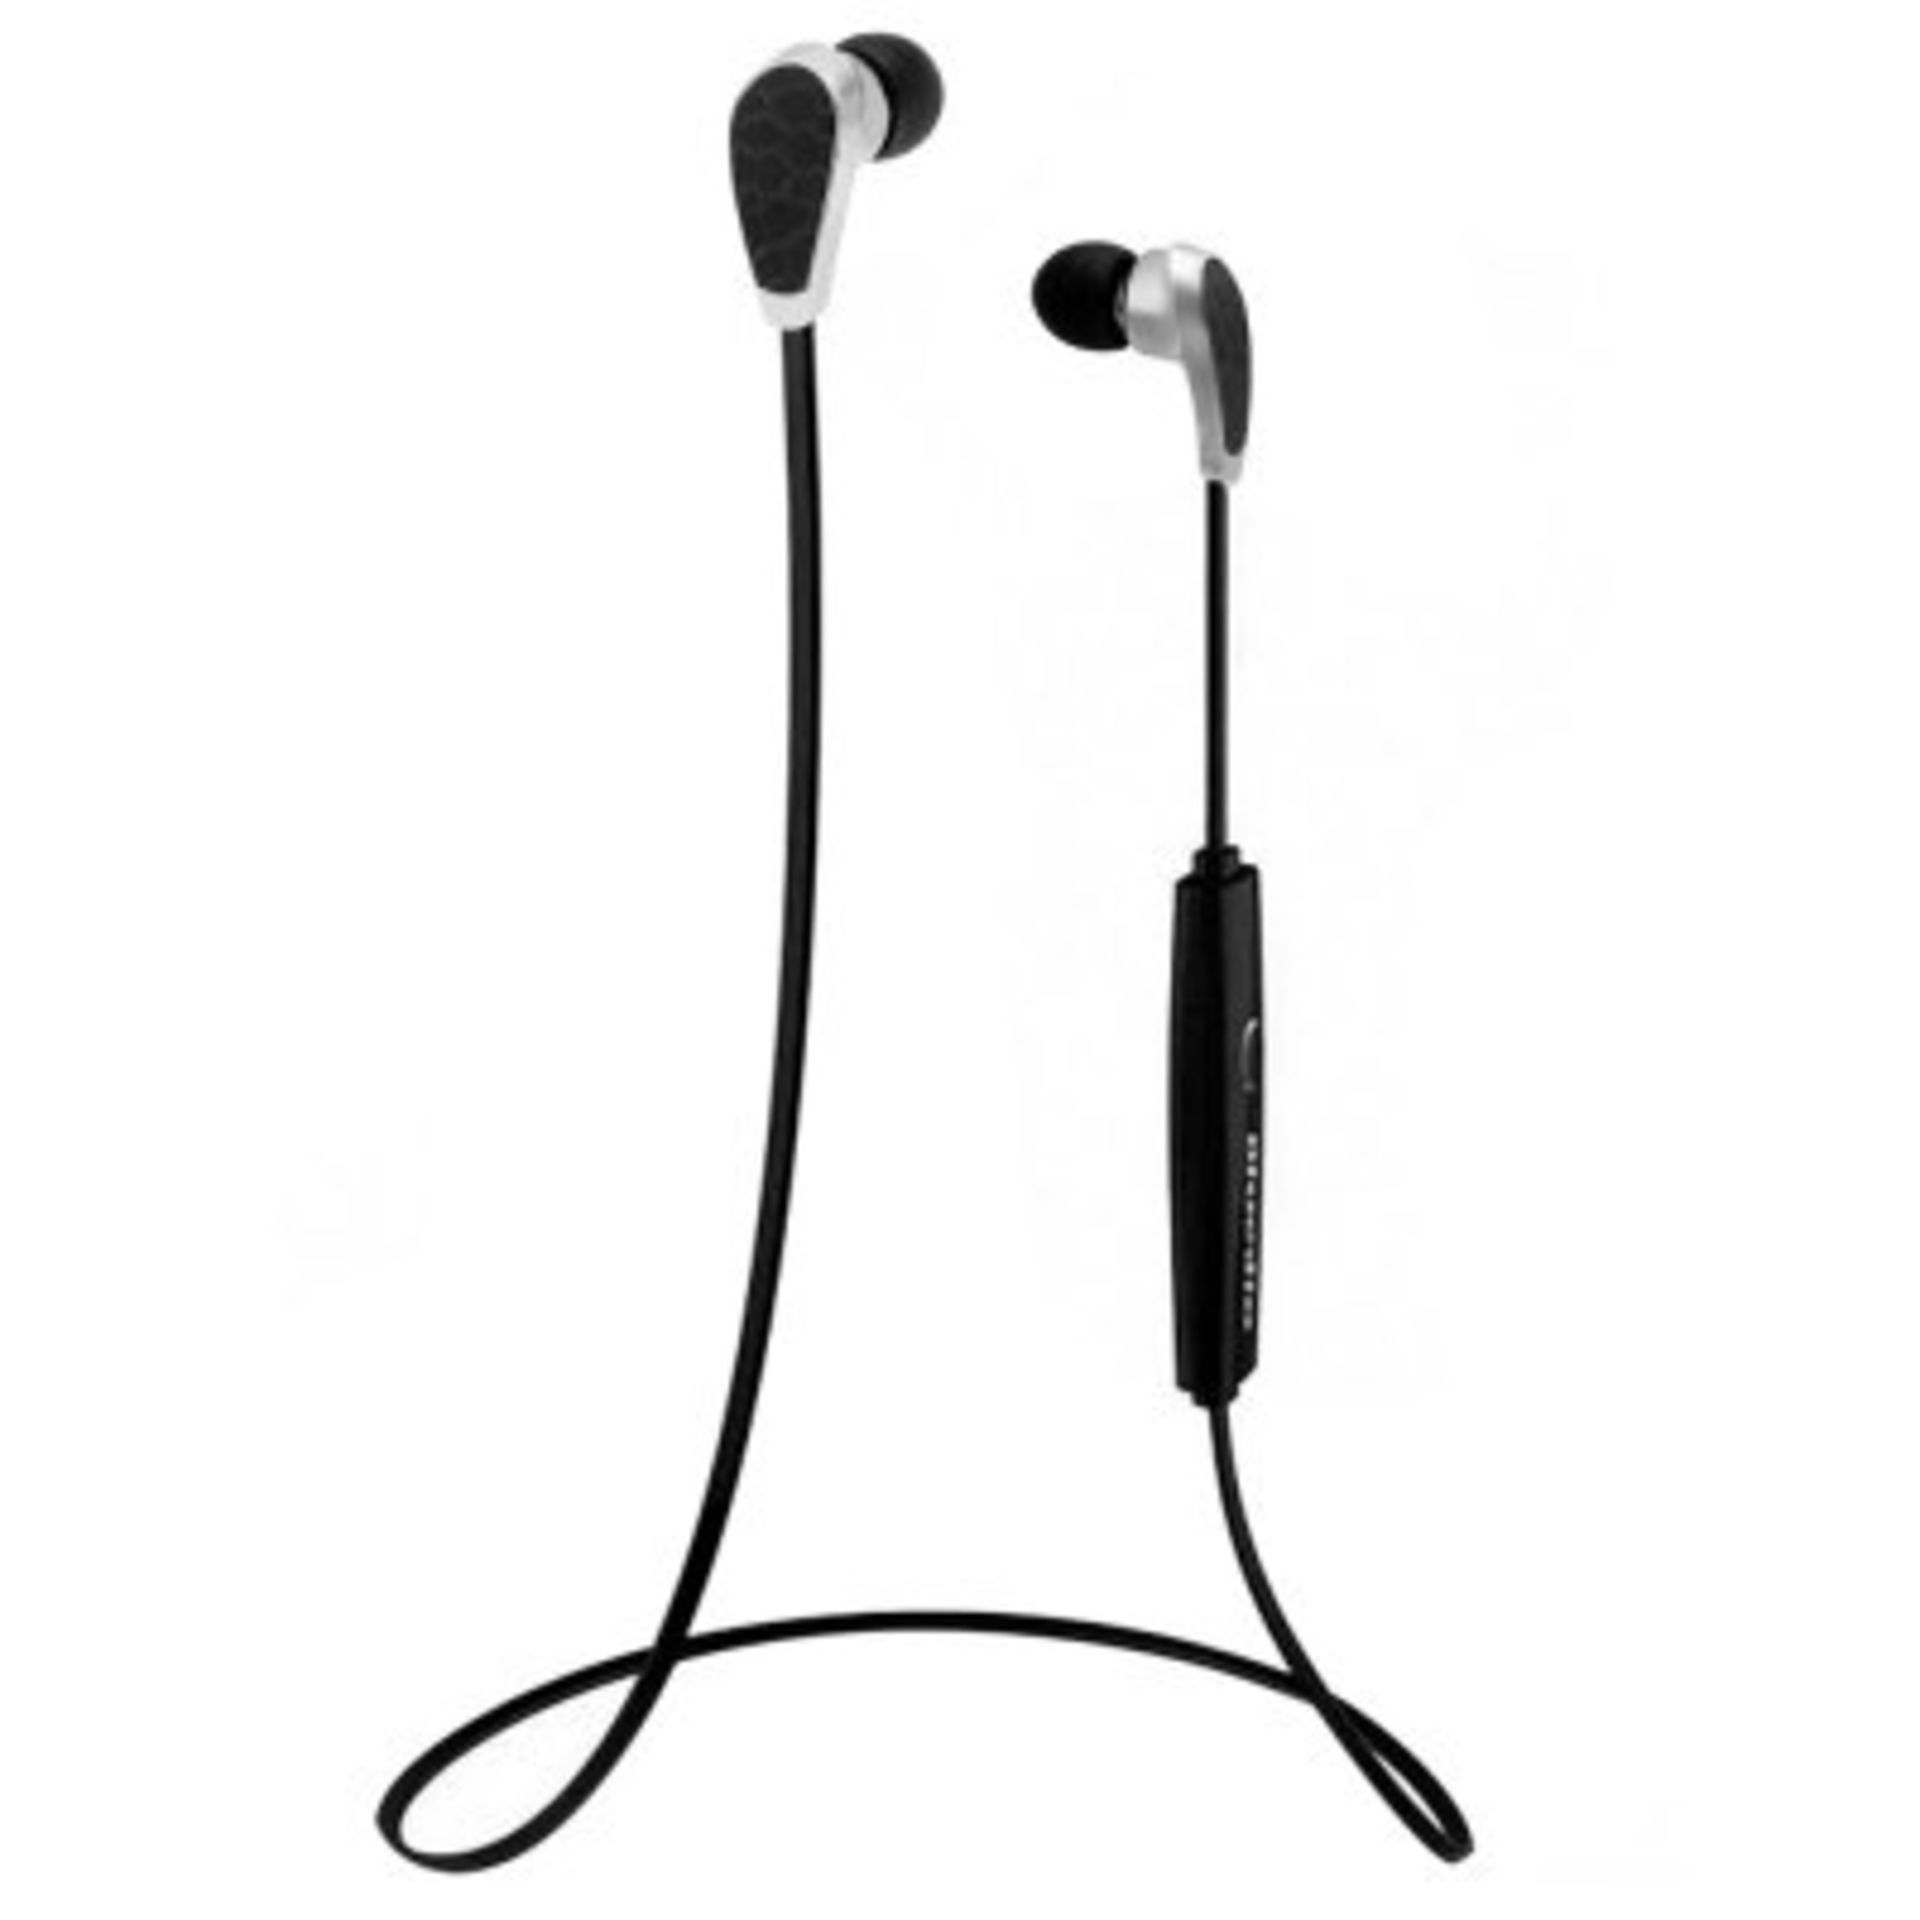 V Grade U Pair of Bluetooth Earphones/Headset (All Boxed) - Colours and Styles/Makes May Vary - Some - Image 5 of 7